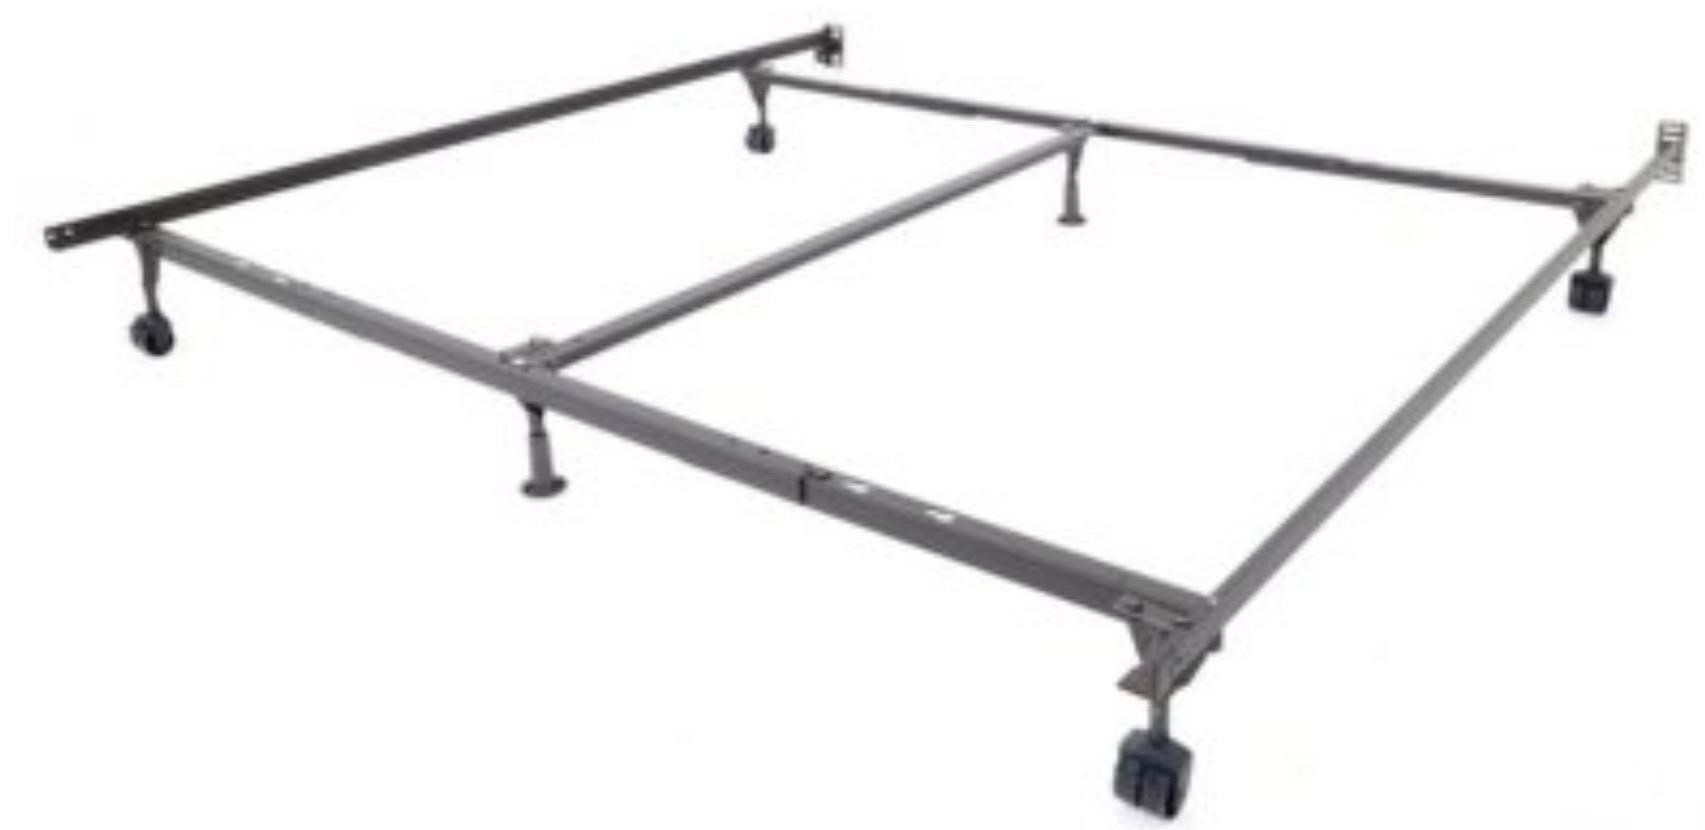 Rize universal steel bed frame